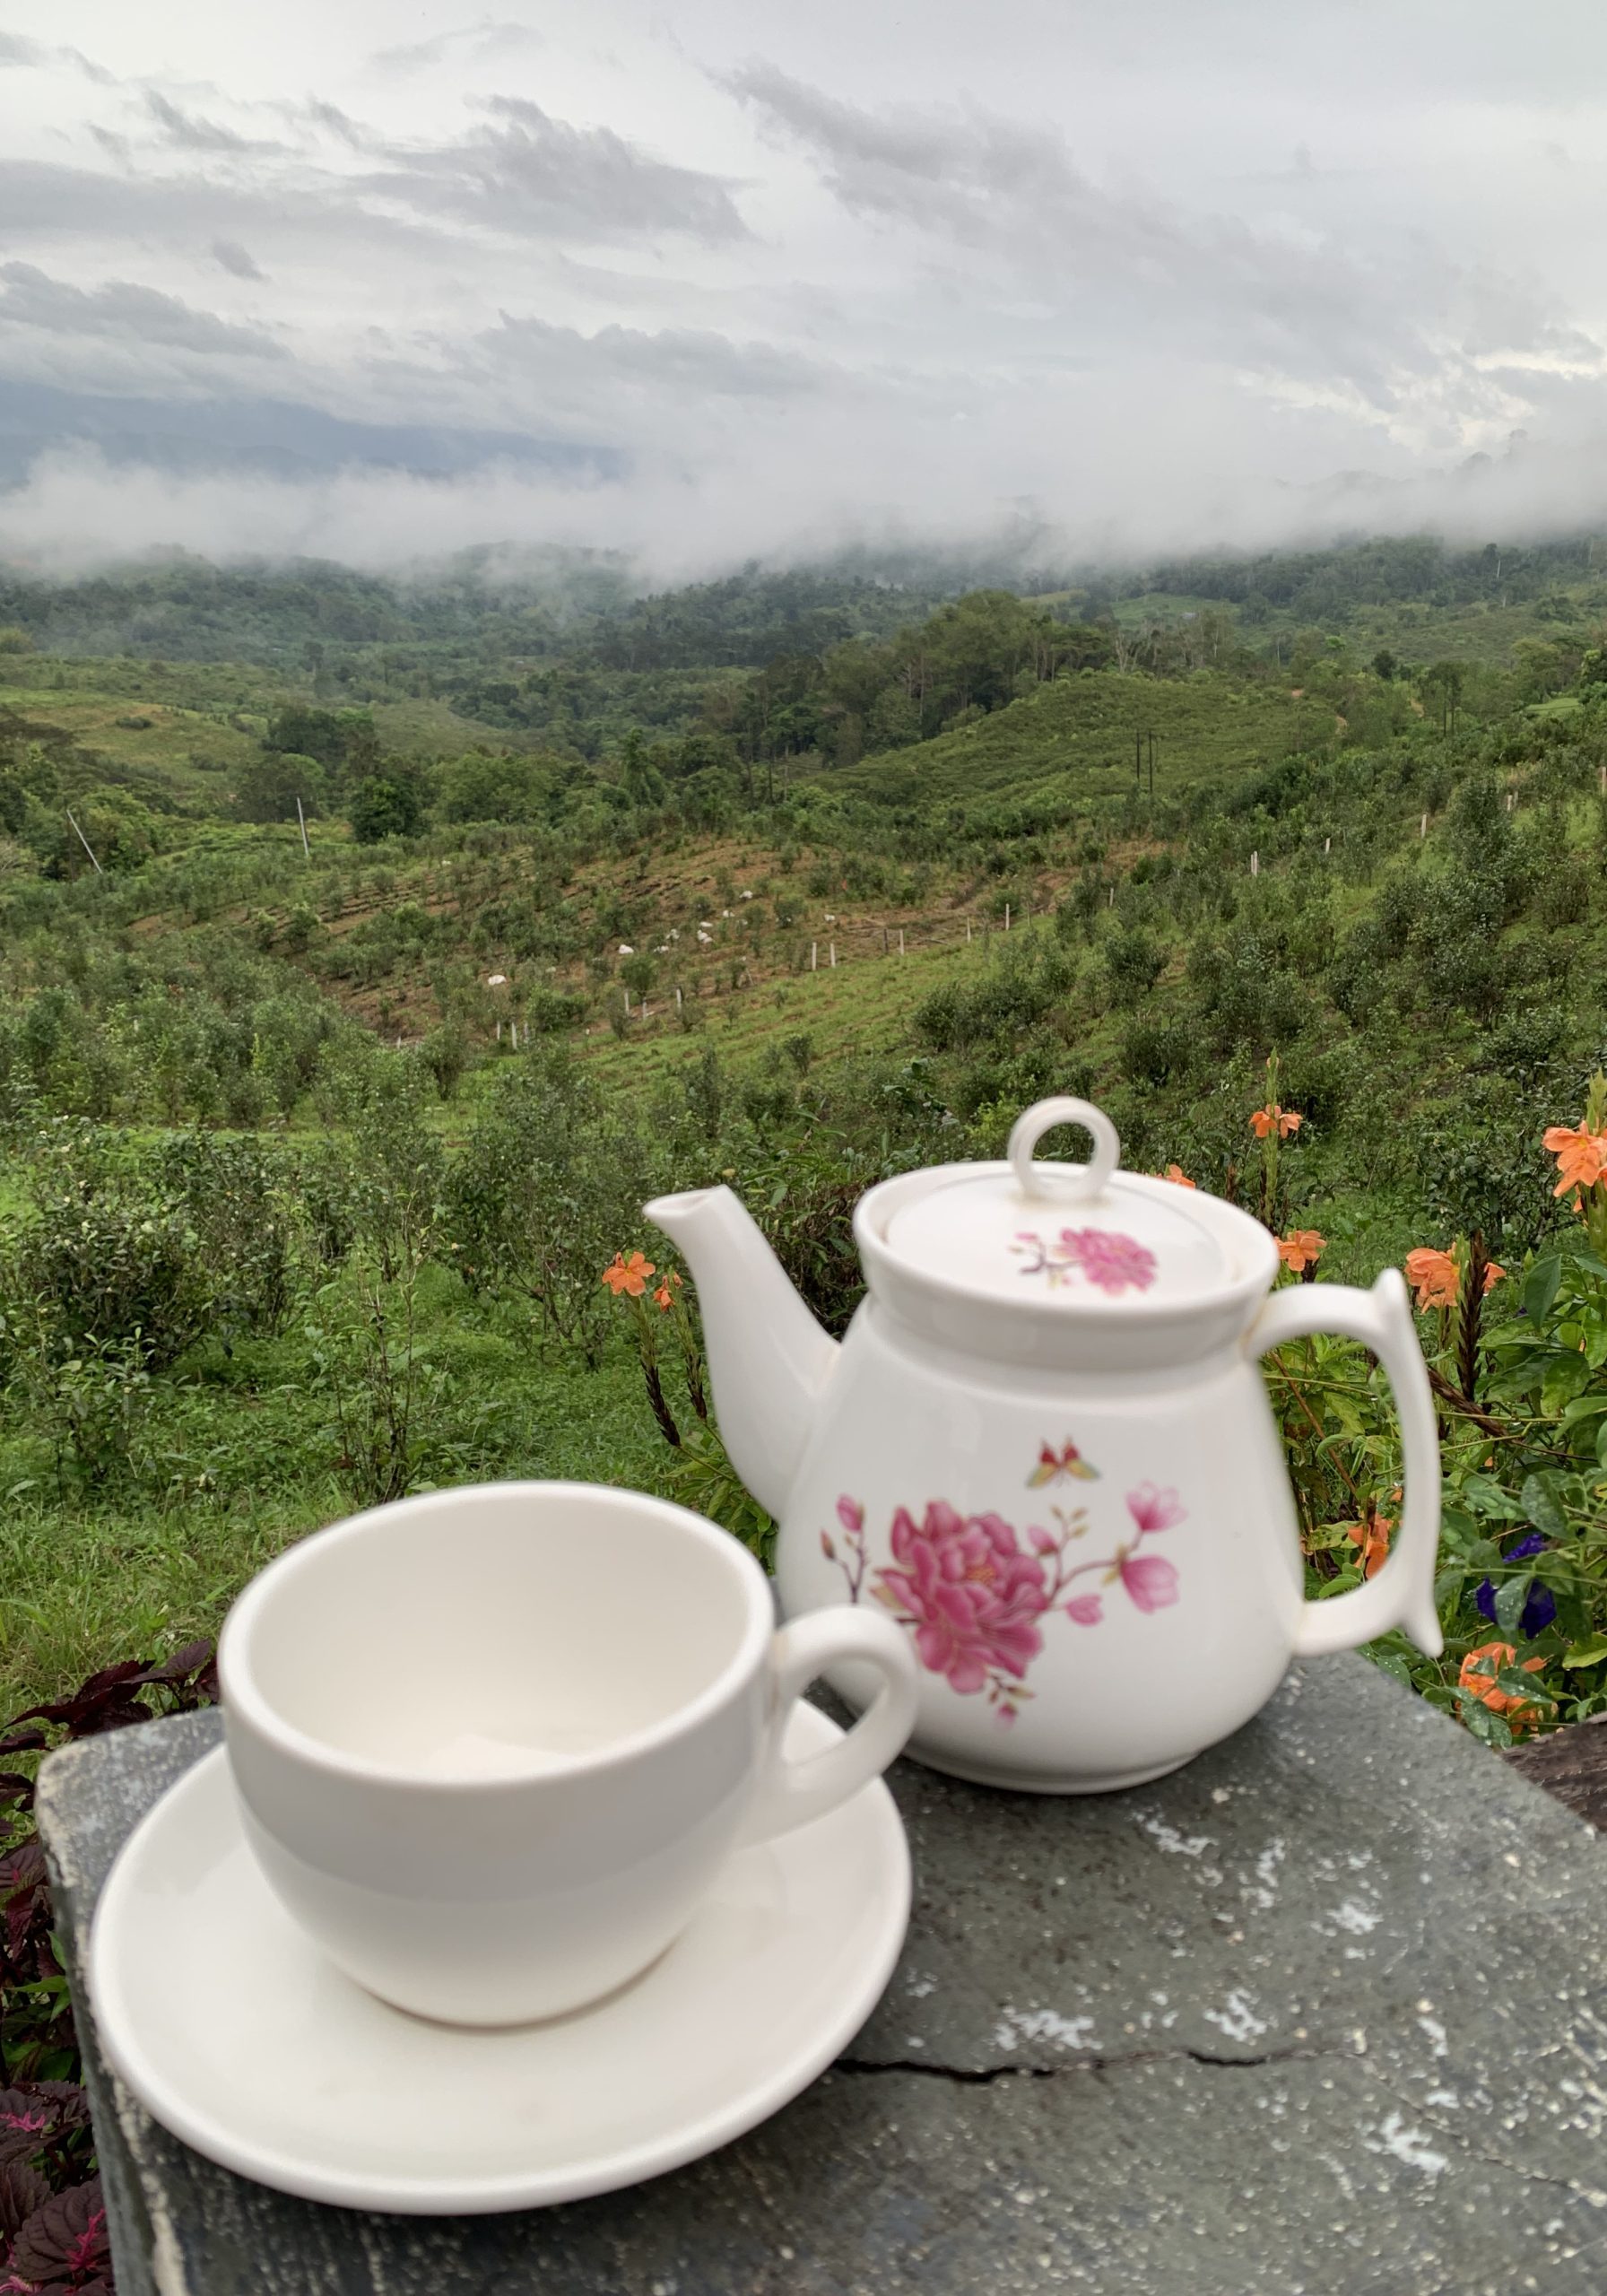 Overlooking the Organic Tea fields with a pot of tea and tea cup in view